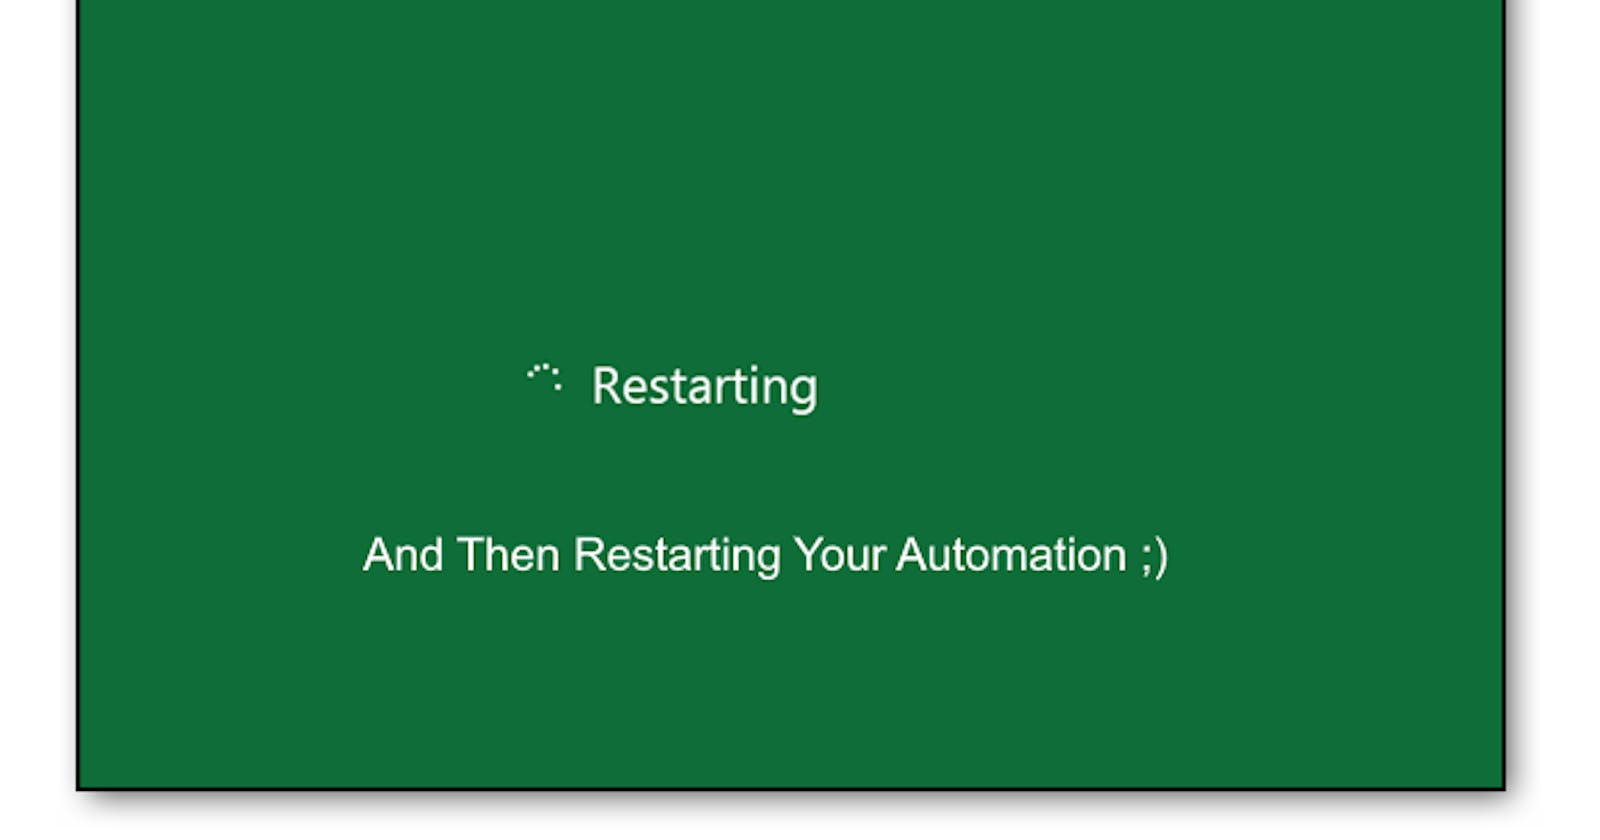 Continue Your Automation To Run Once After Restarting a Headless Windows System